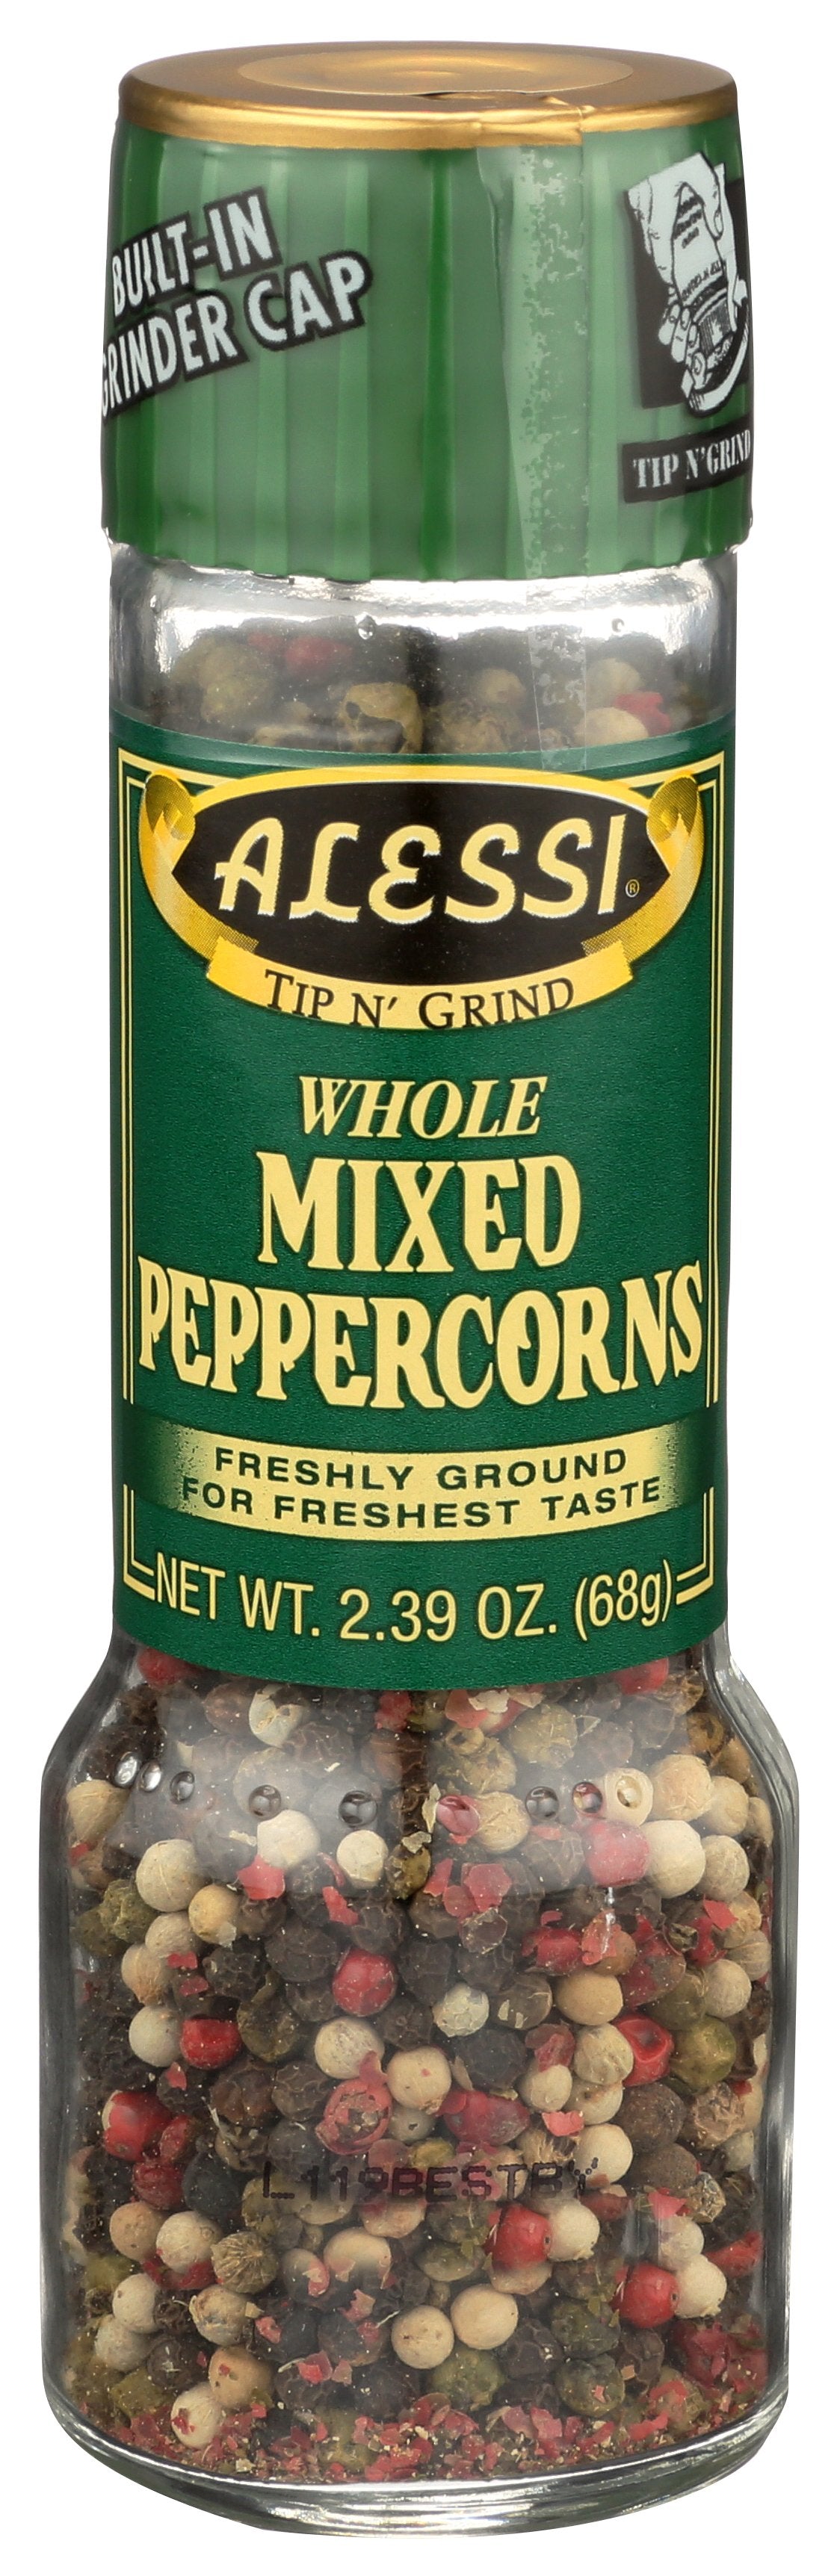 ALESSI PEPPERCORN MIXED - Case of 6